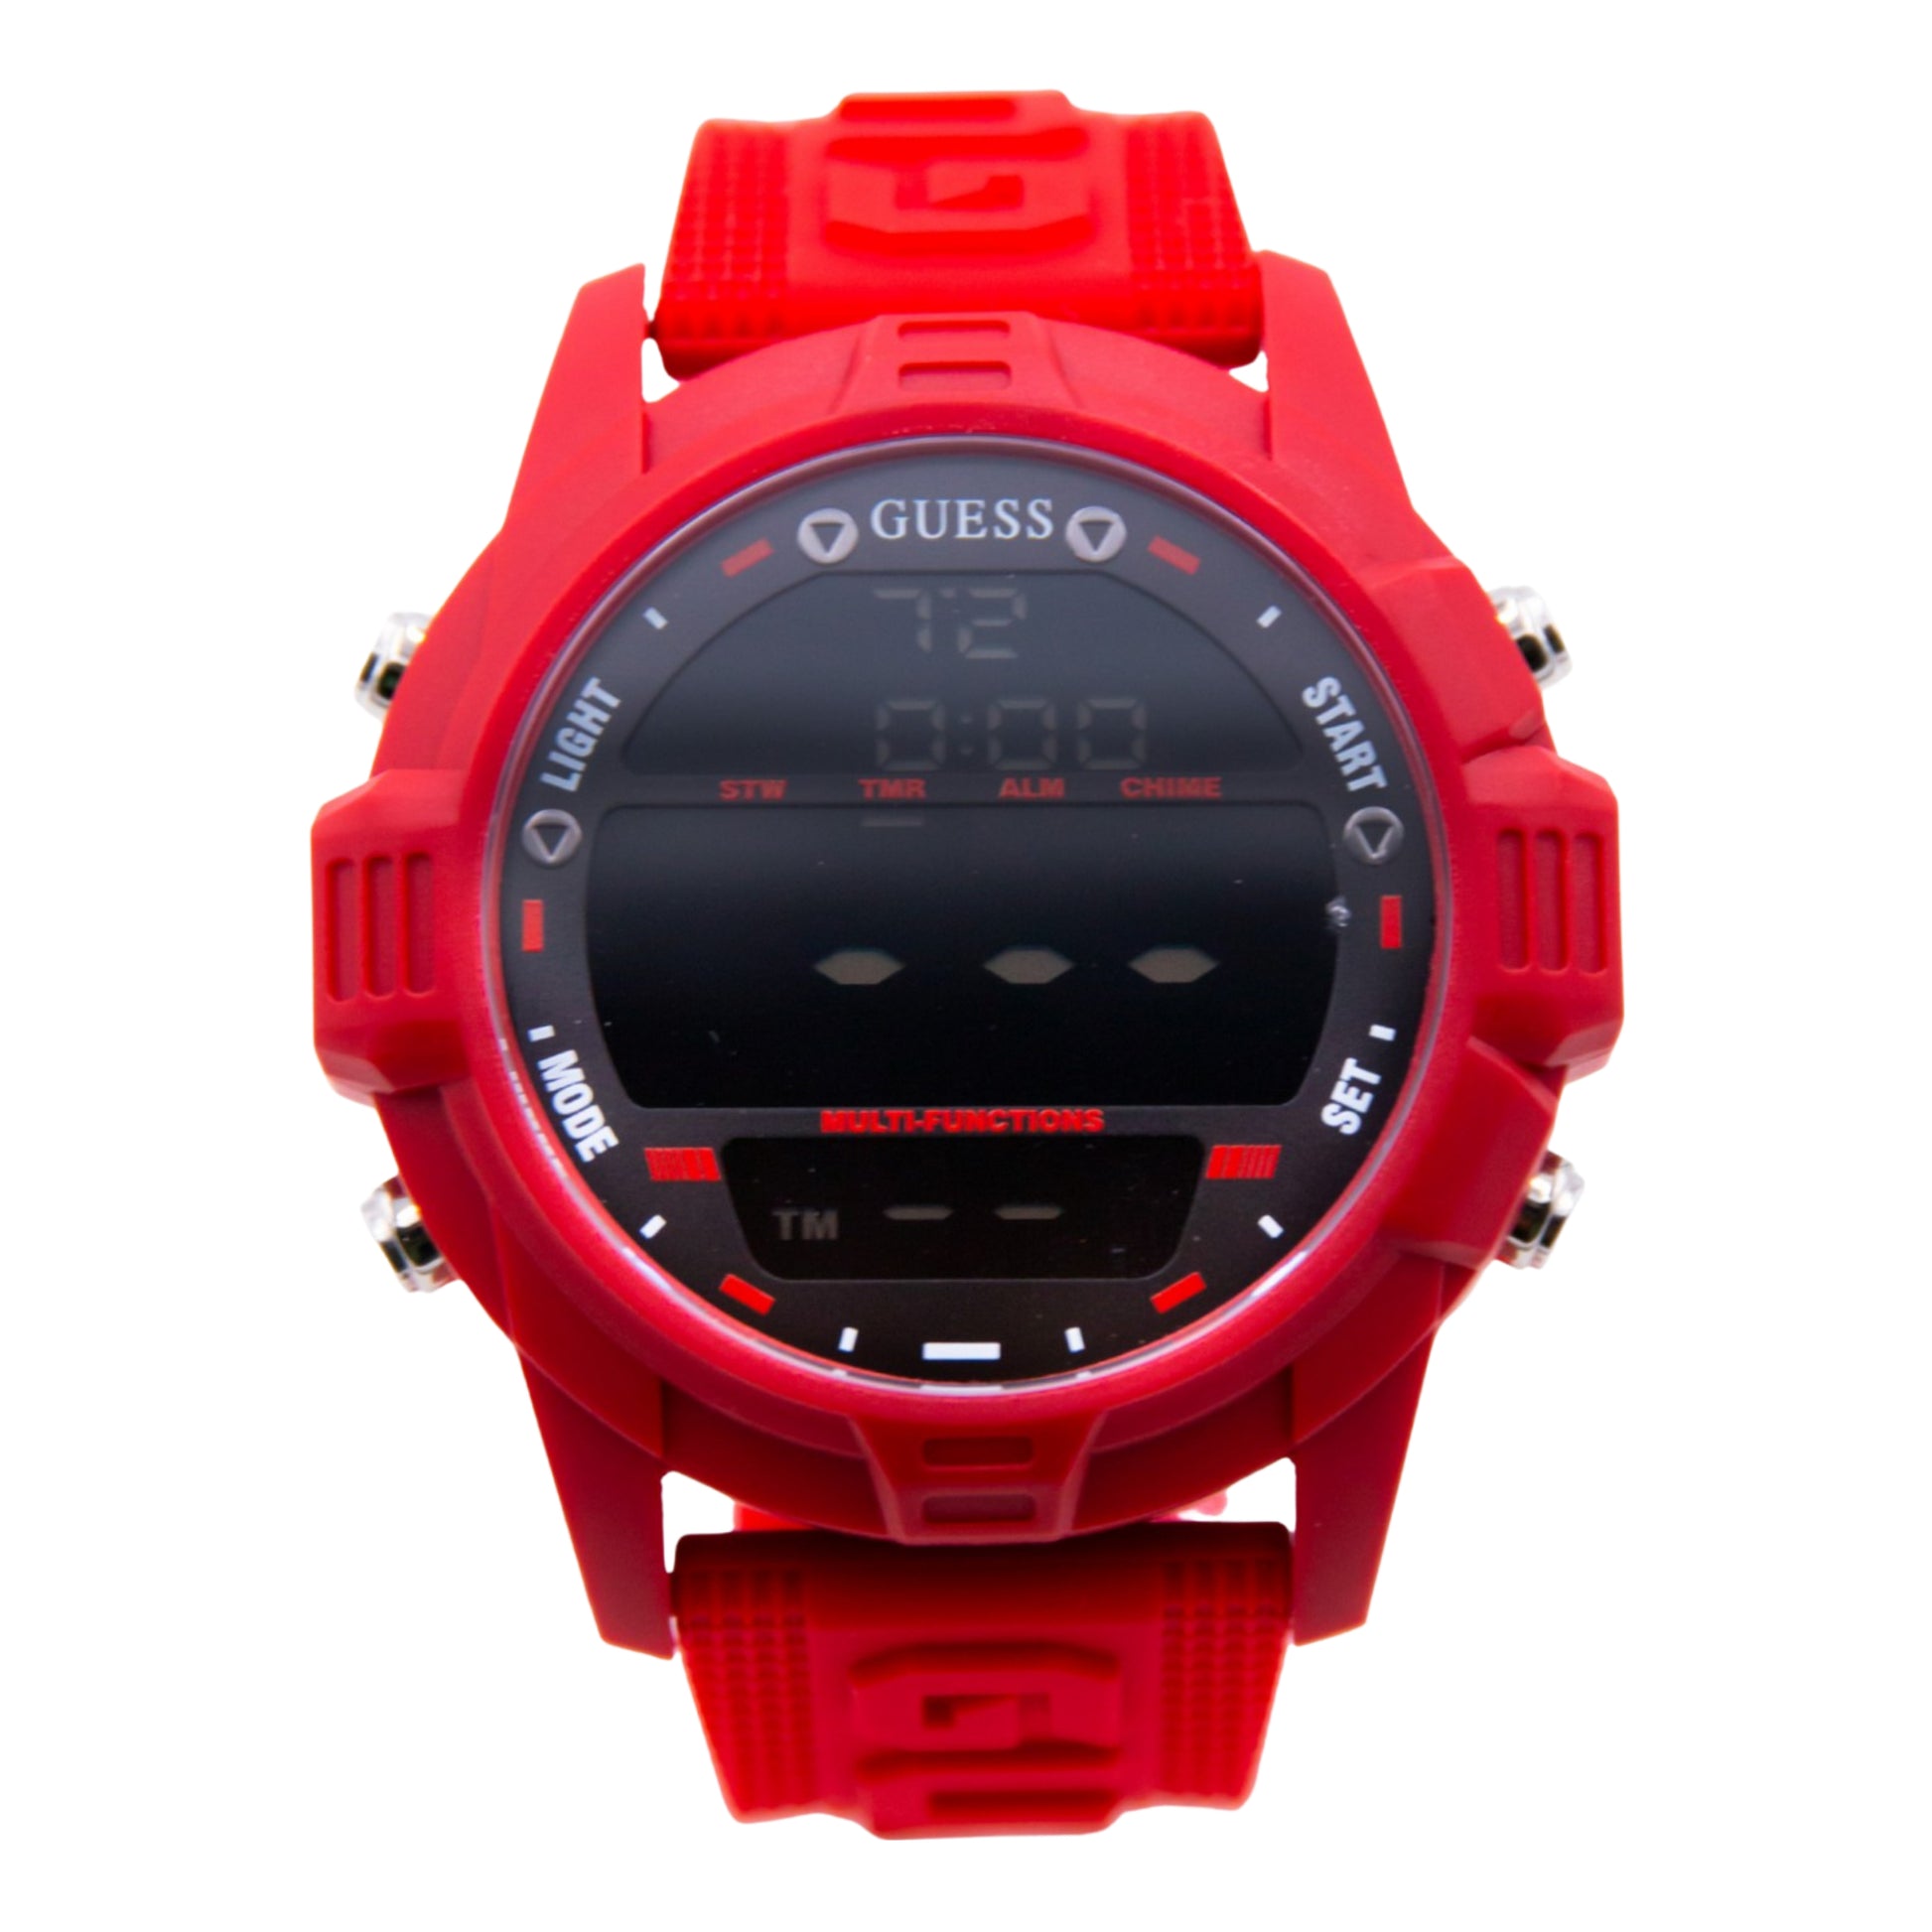 GUESS Men's Charge Red Silicone Quartz Watch - U1299G3 - 91661509384